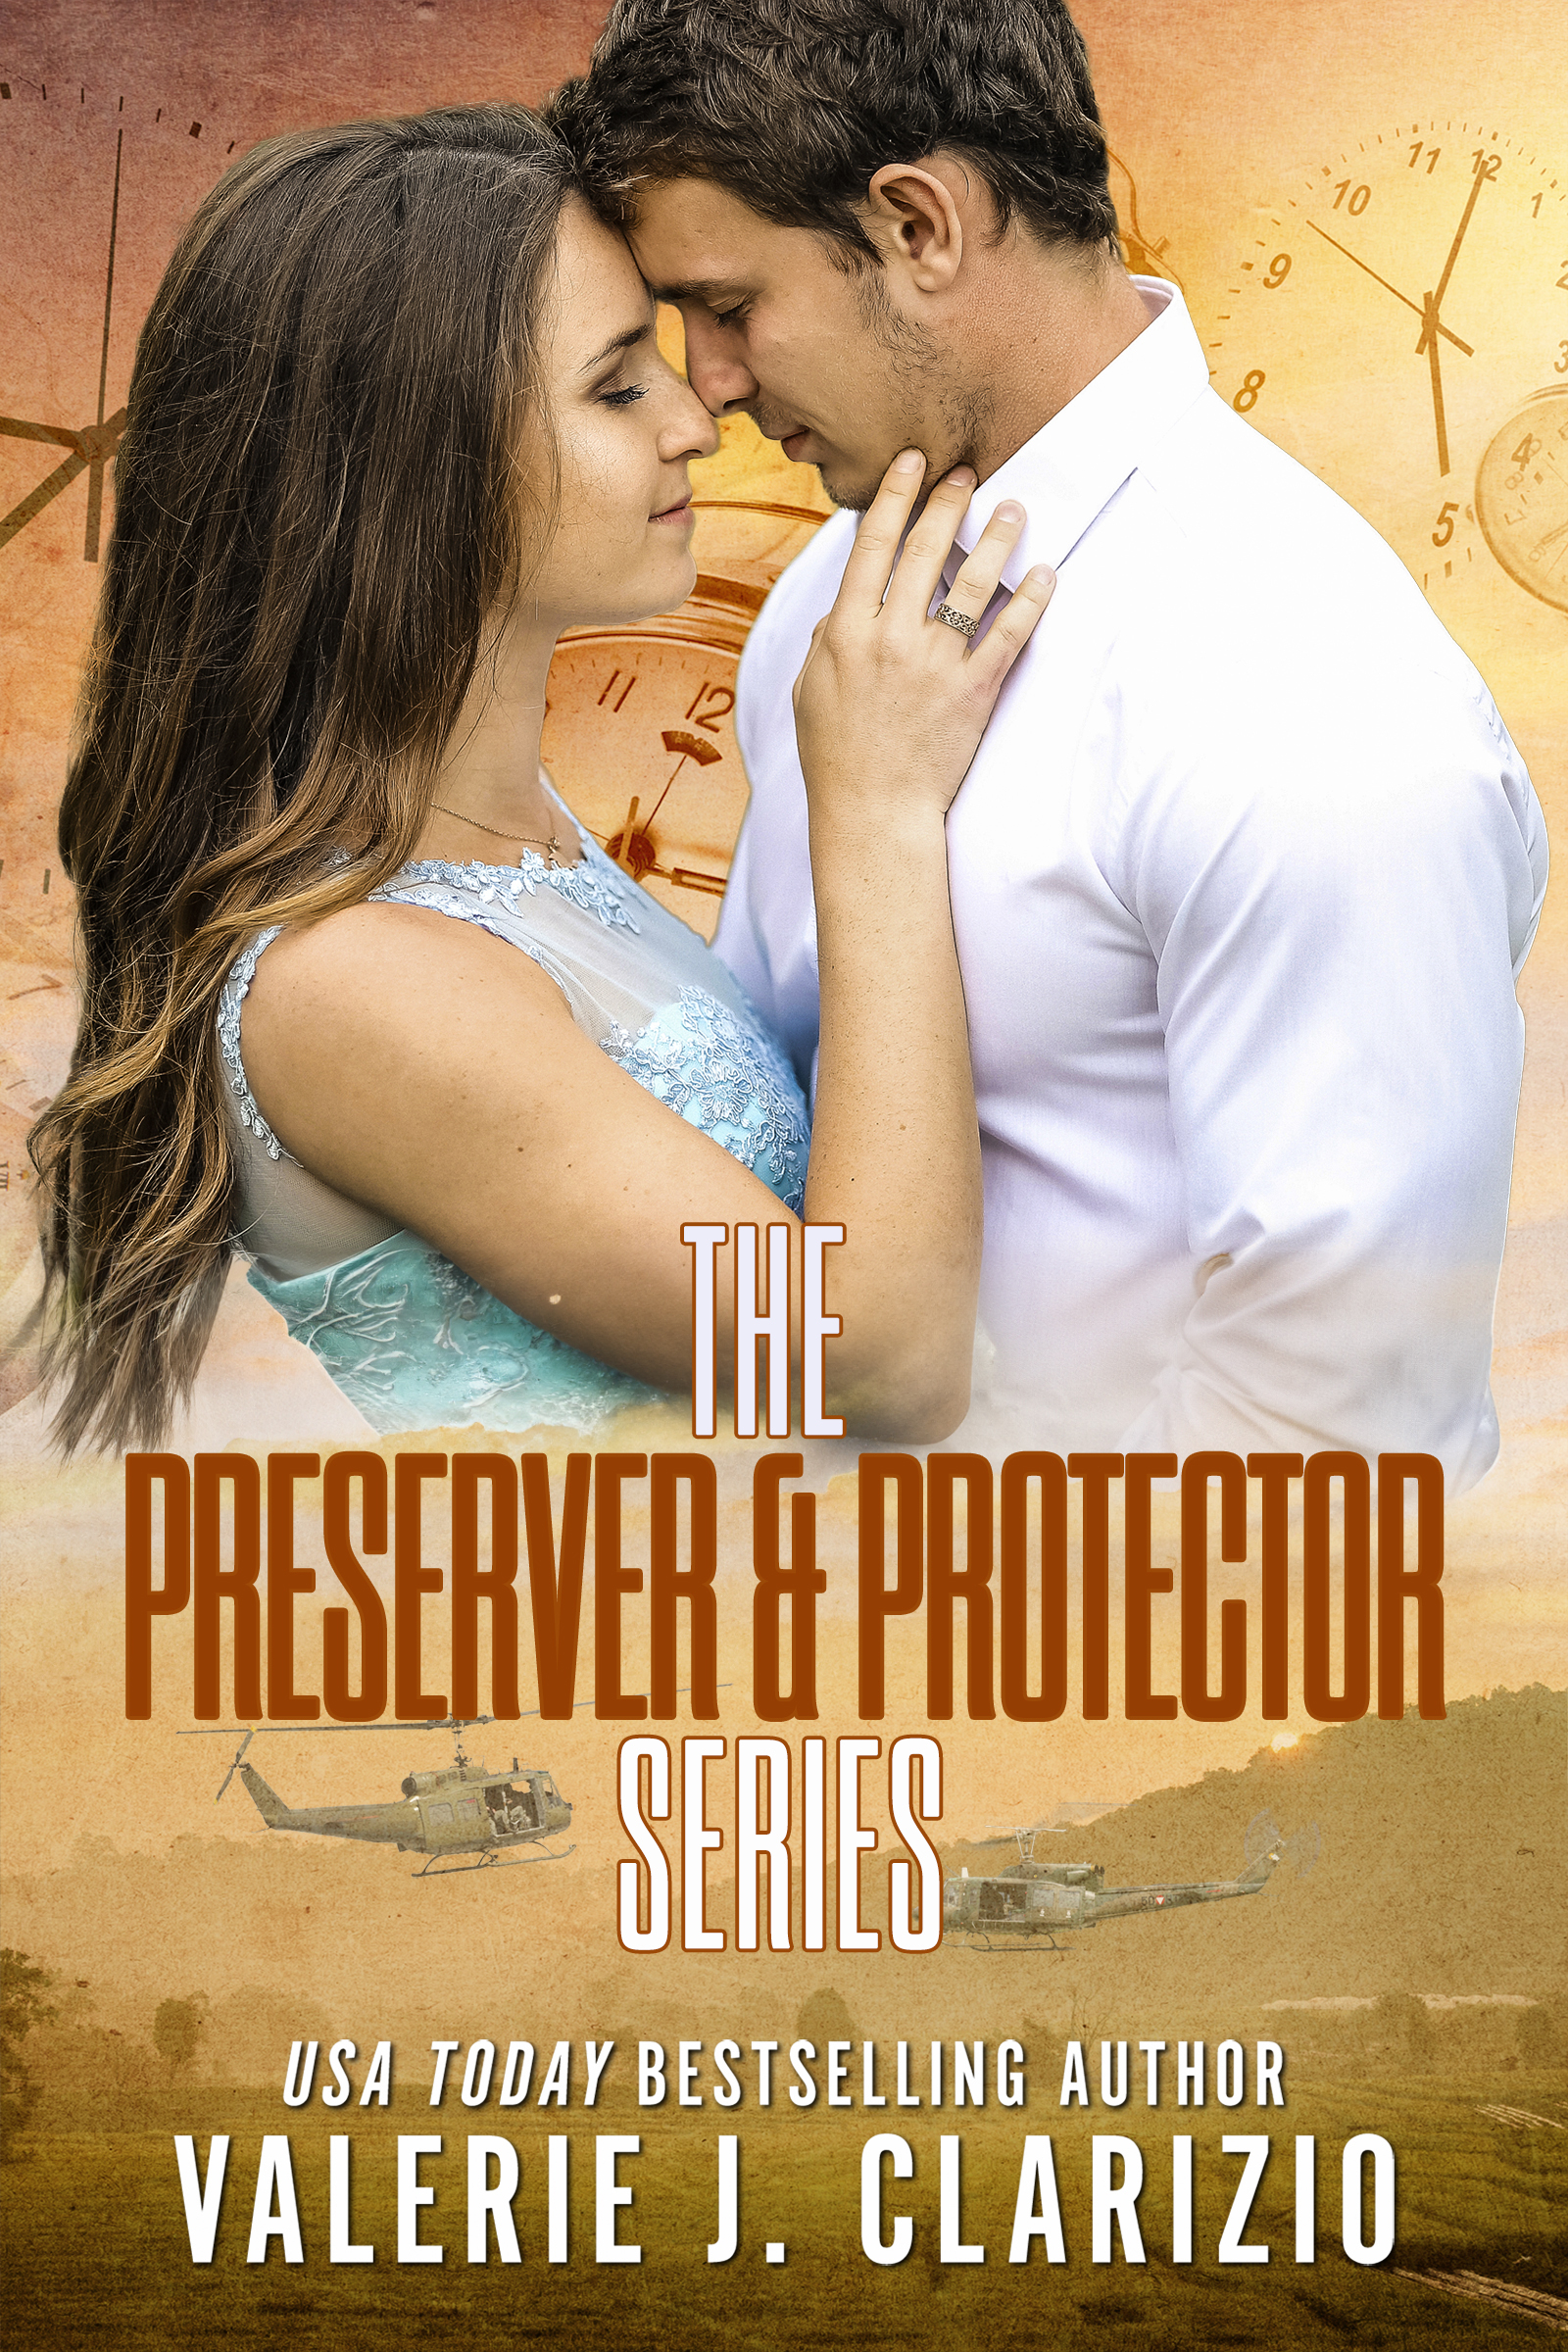 The Preserver & Protector Series - Book cover